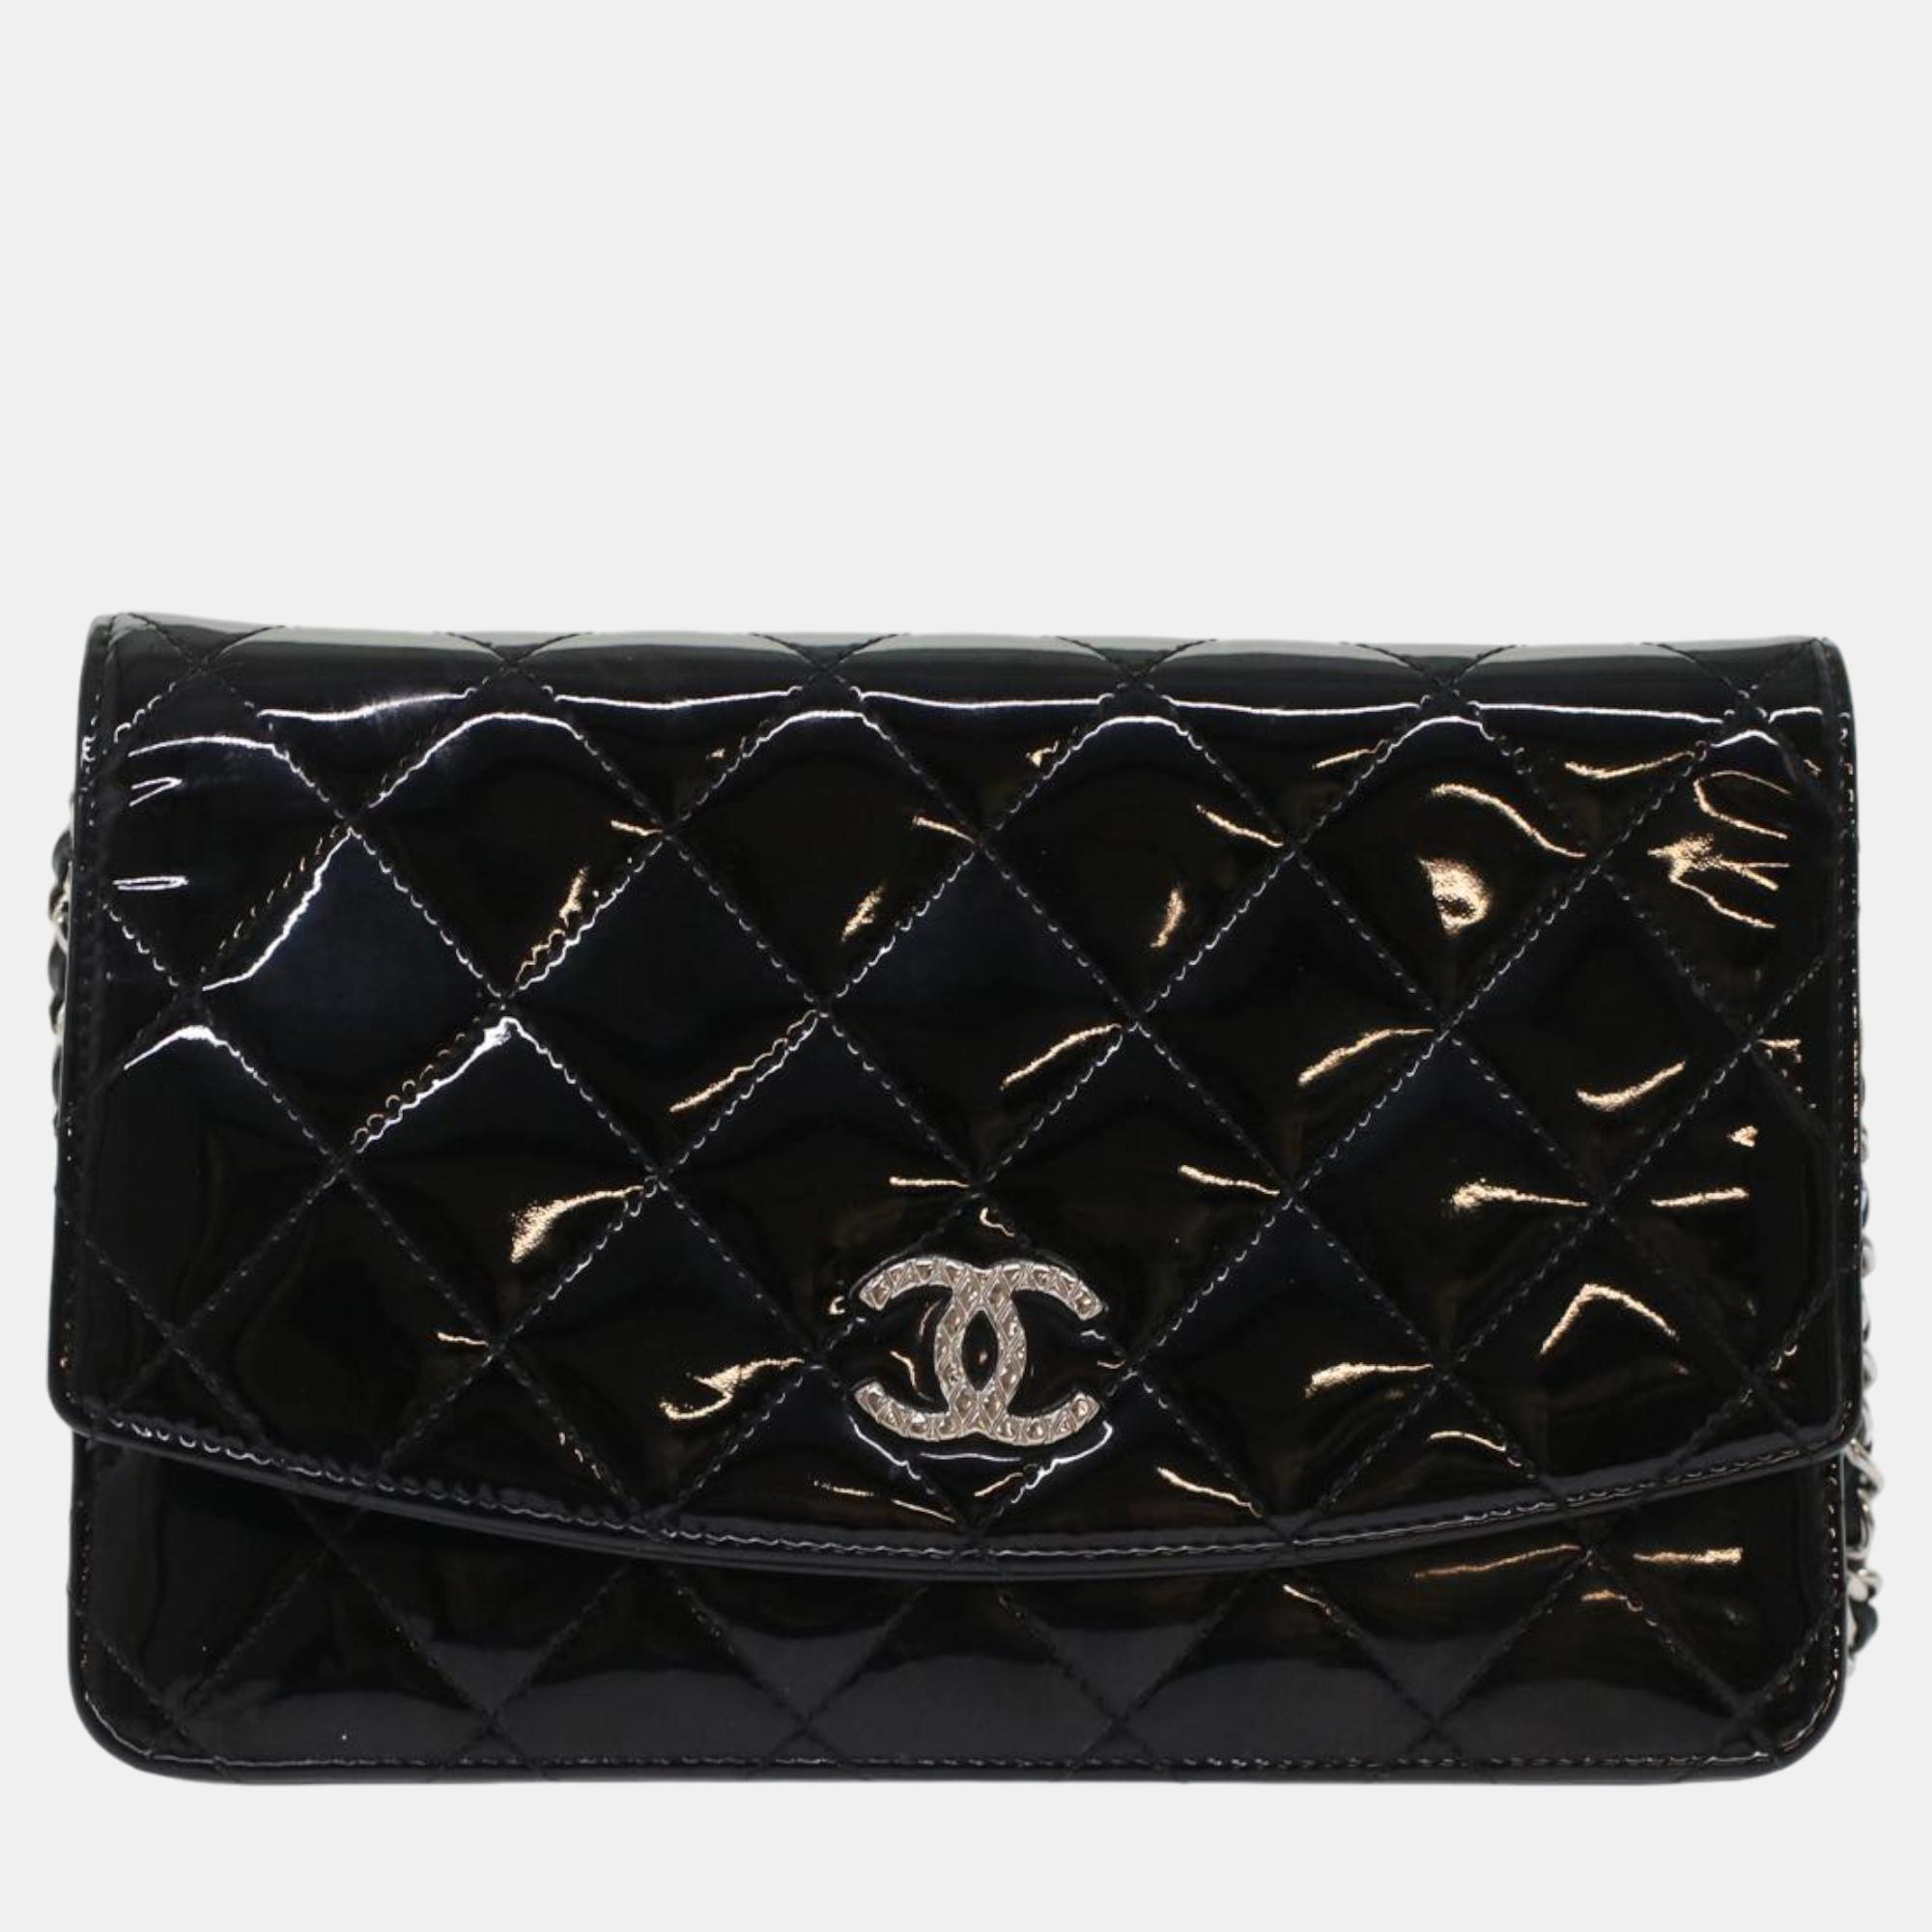 Chanel black patent leather wallet on chain wallet bag